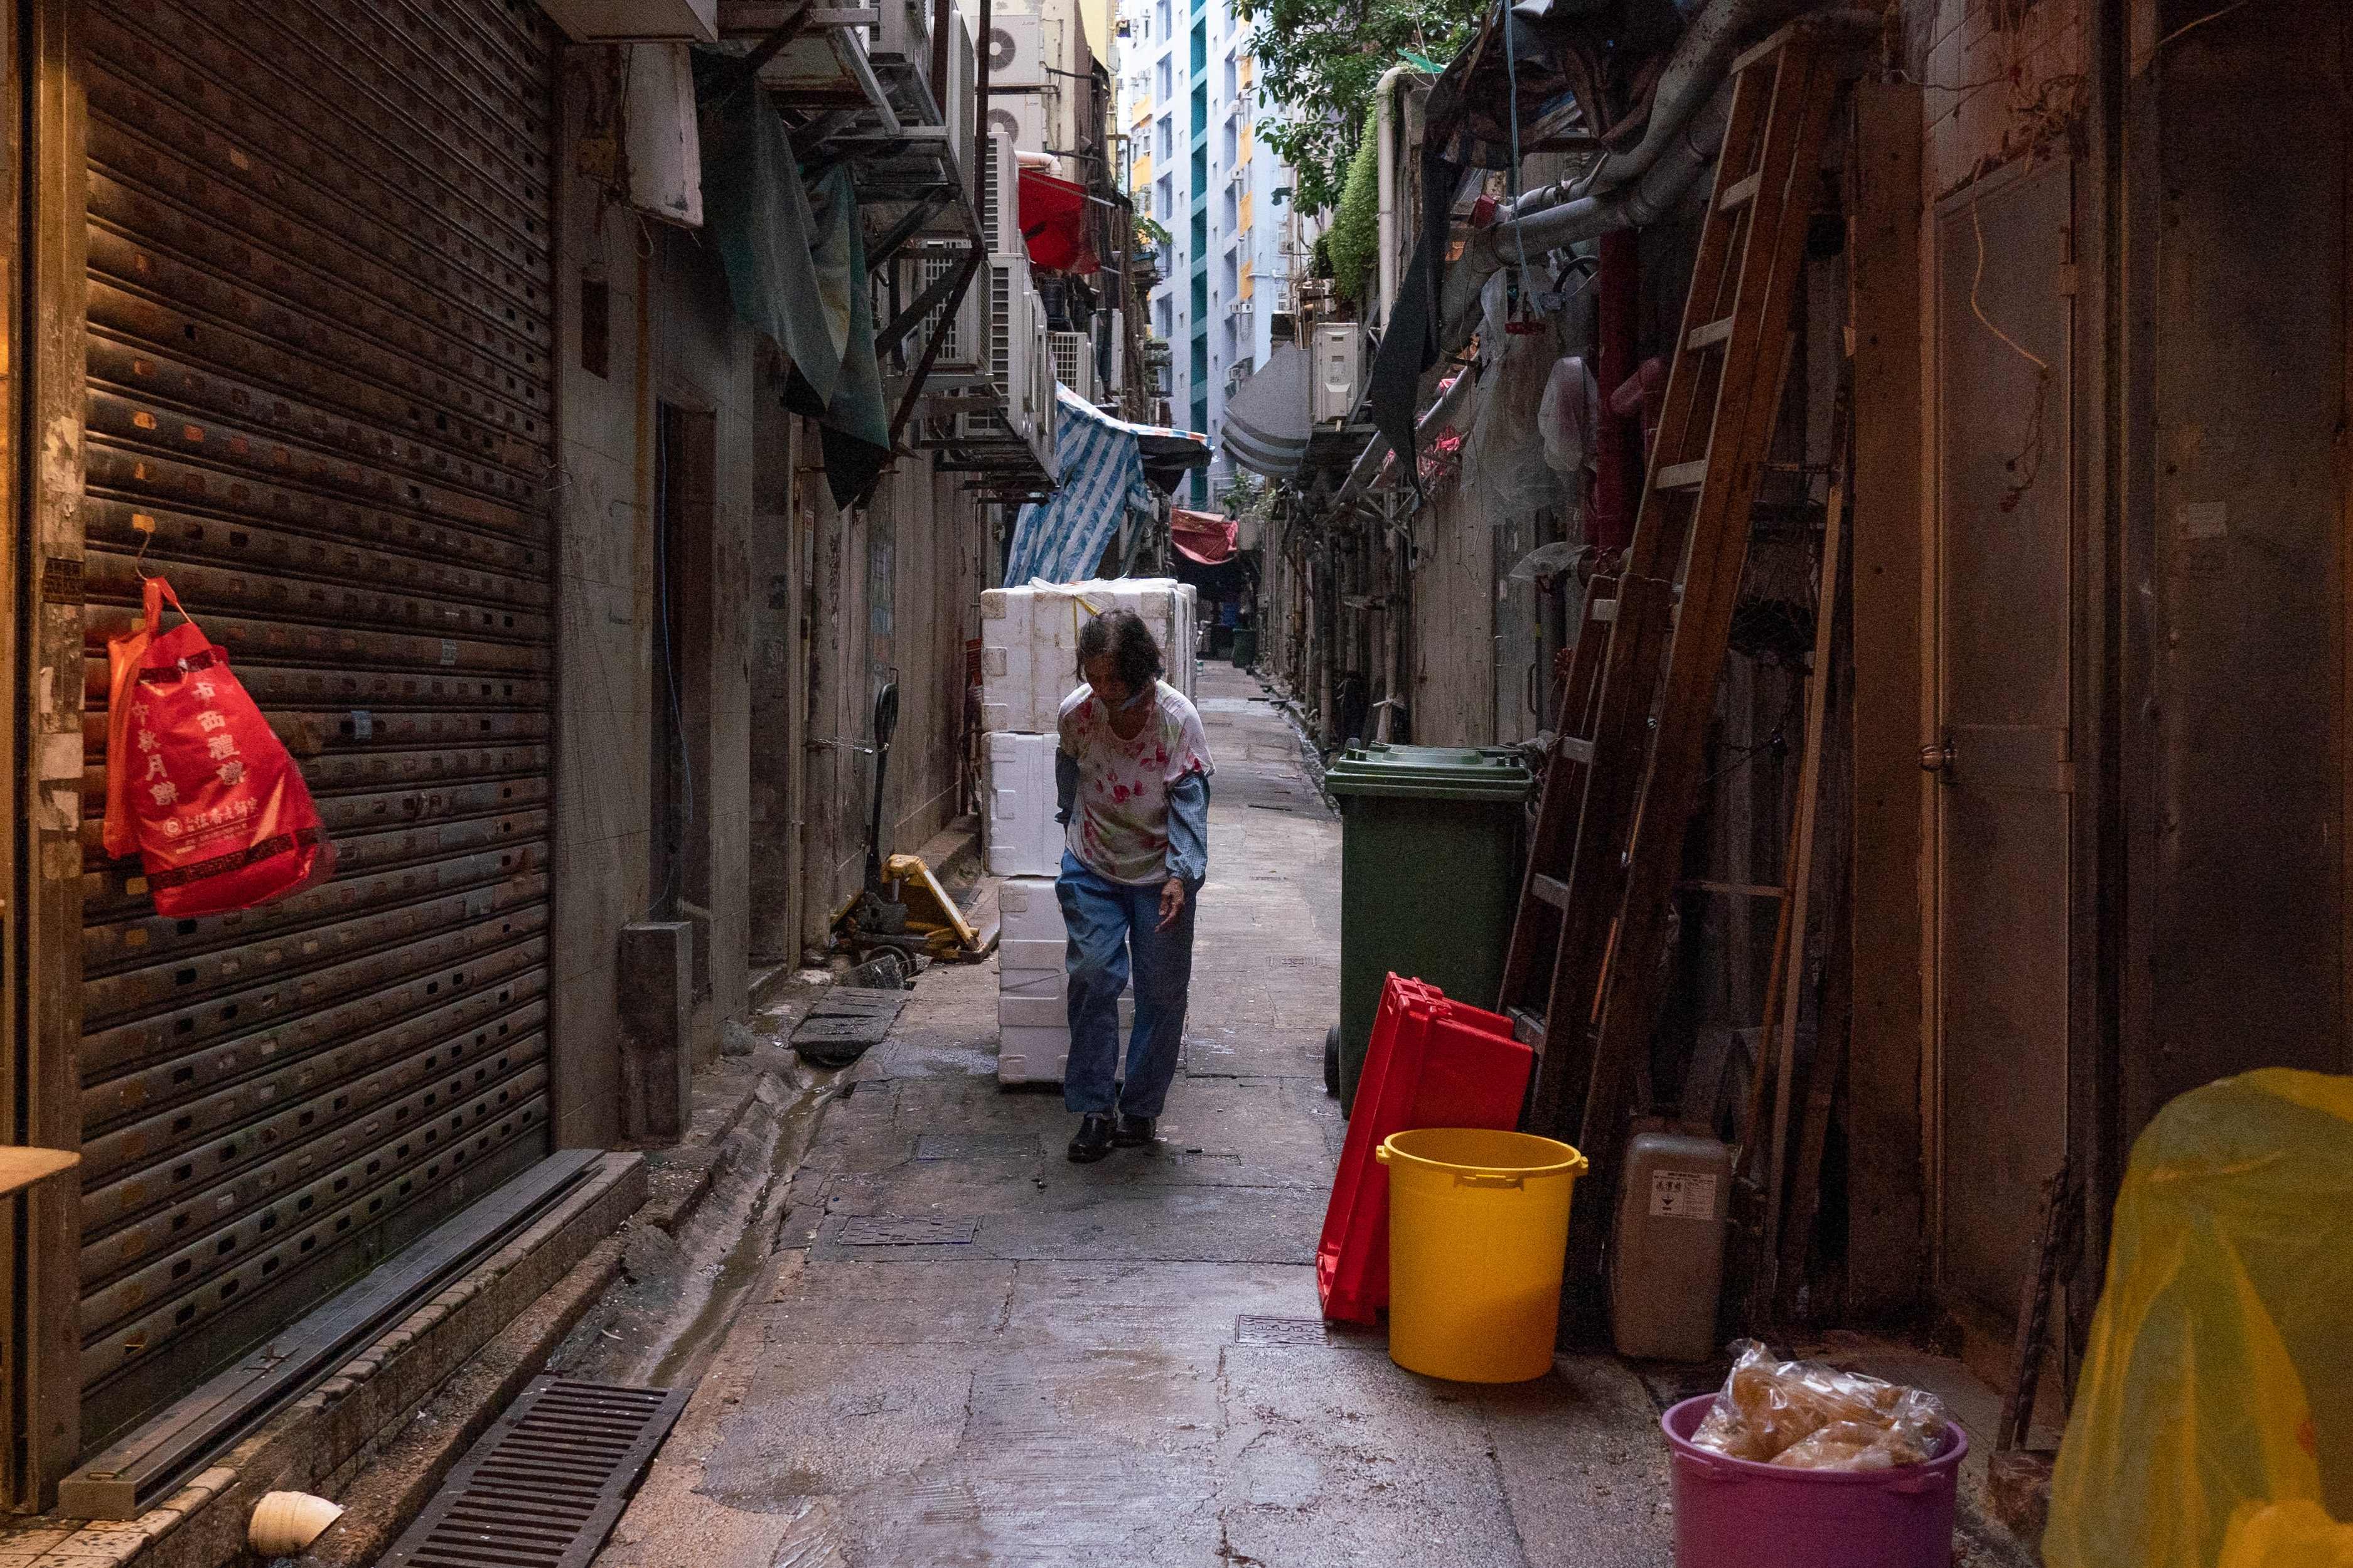 A woman pulls styrofoam boxes in an alley in Kwun Tong on October 21, 2021. Photo: AFP